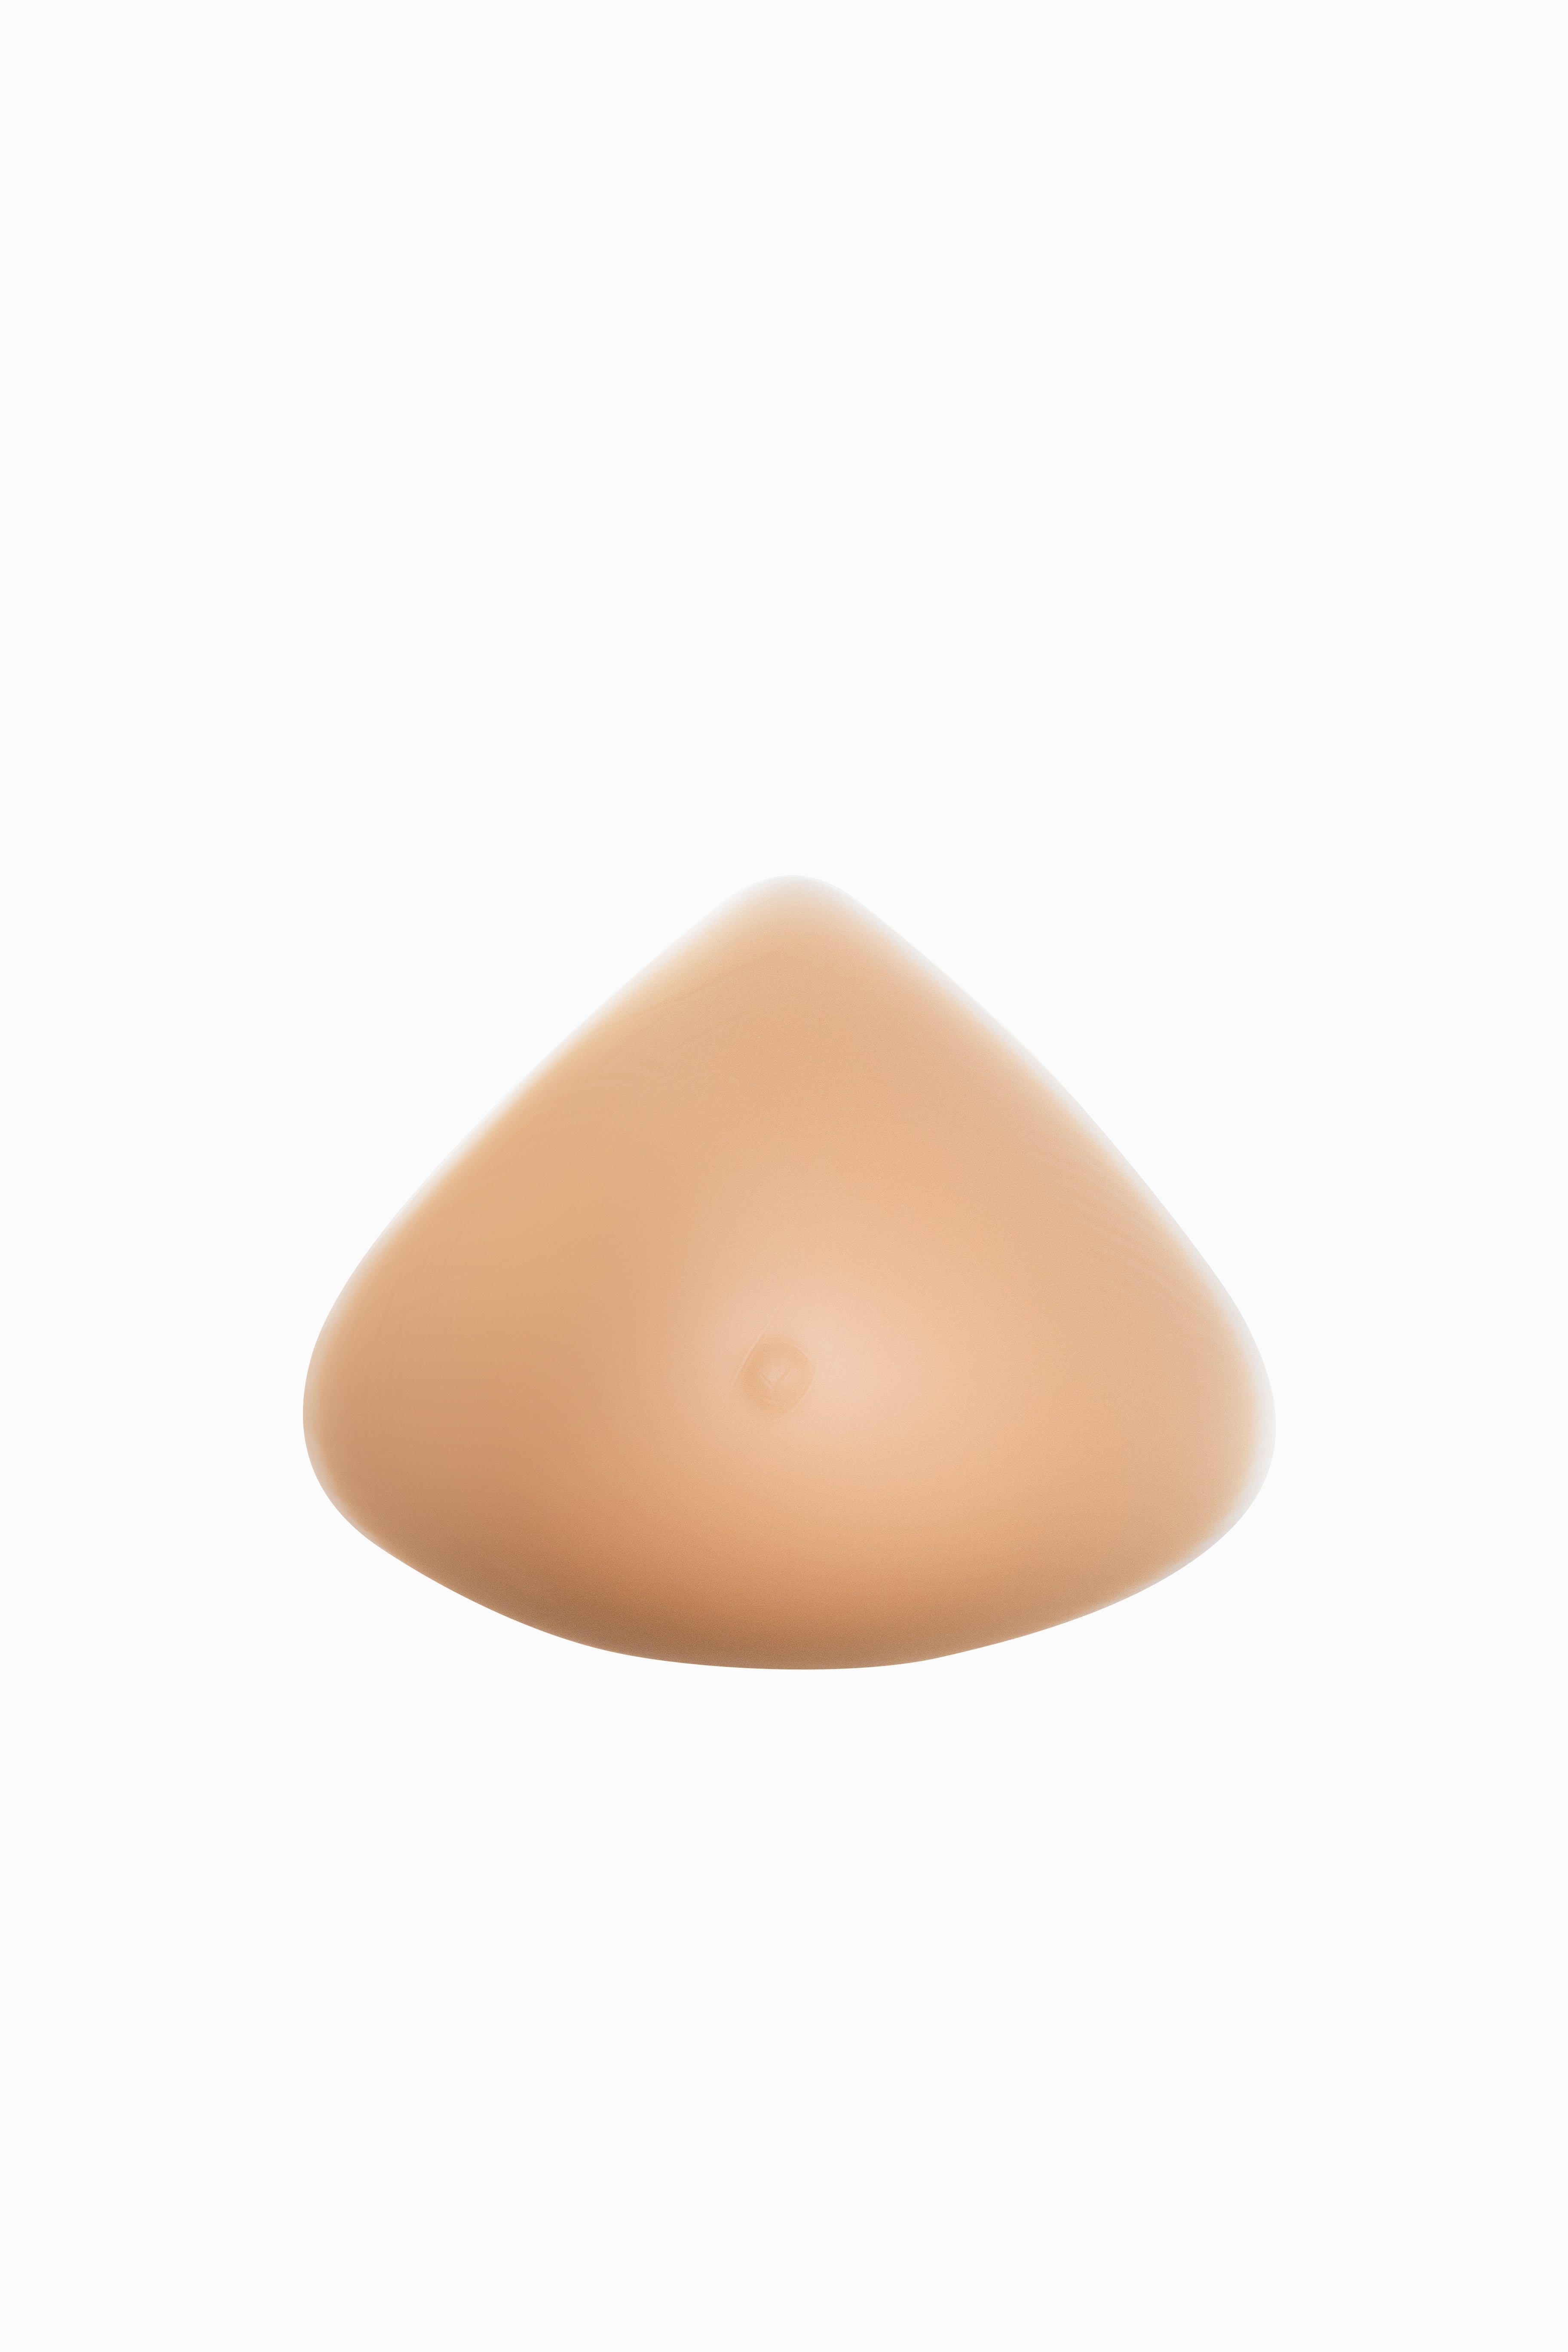 Amoena Natura Cosmetic Prosthesis Breast Form. 320